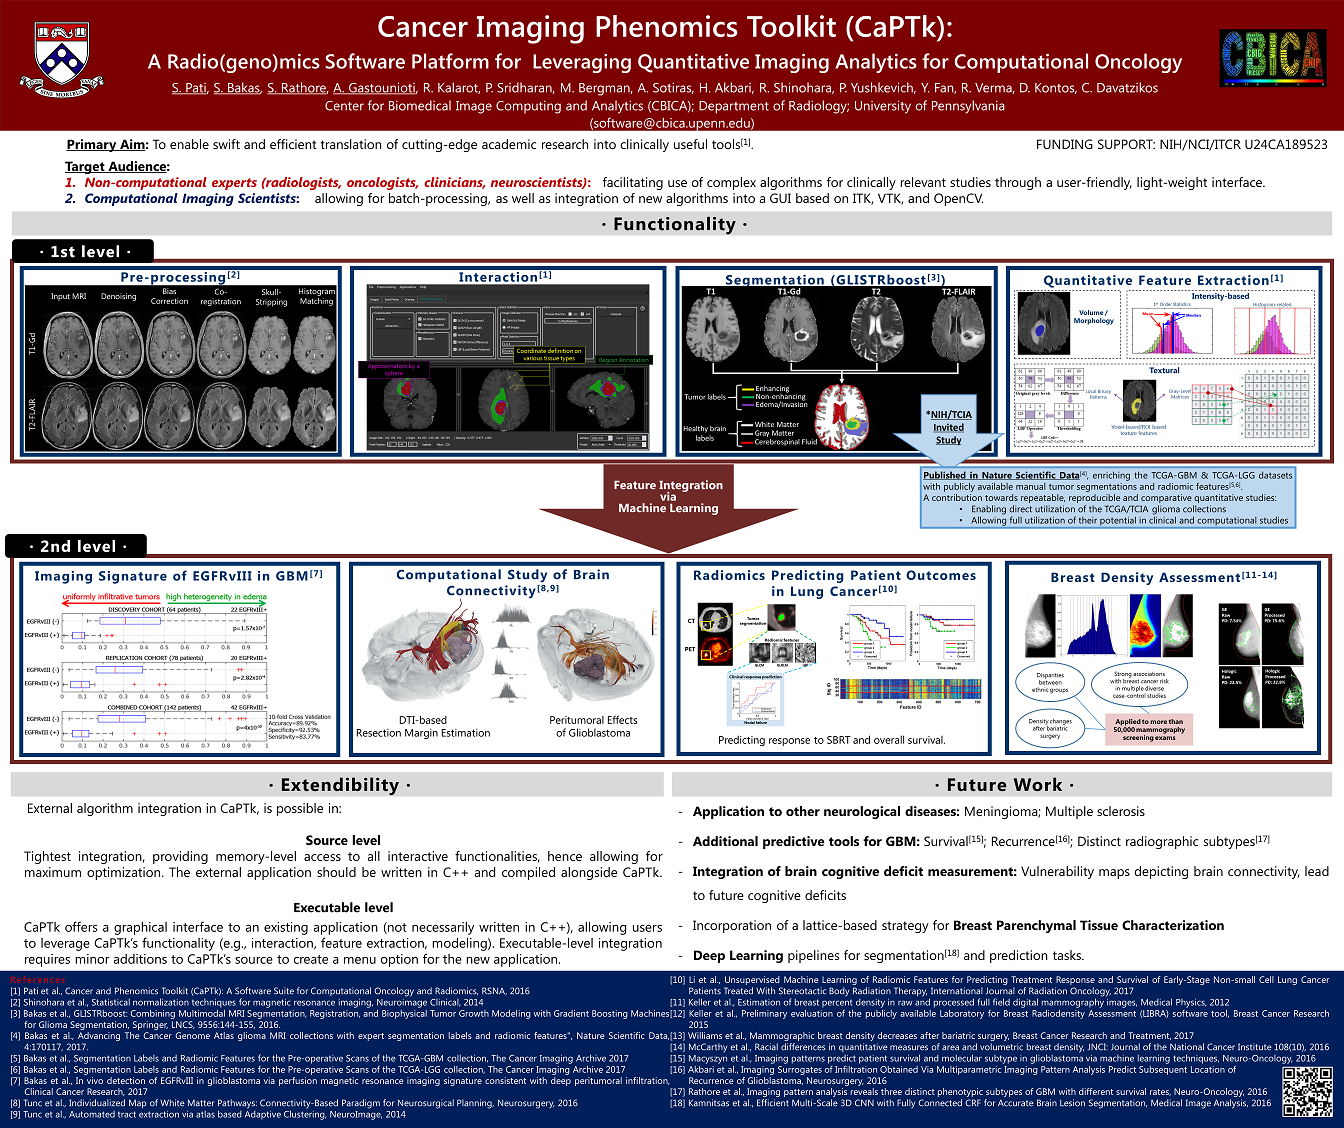 cancer imaging phenomics toolkit poster for RSNA 2017